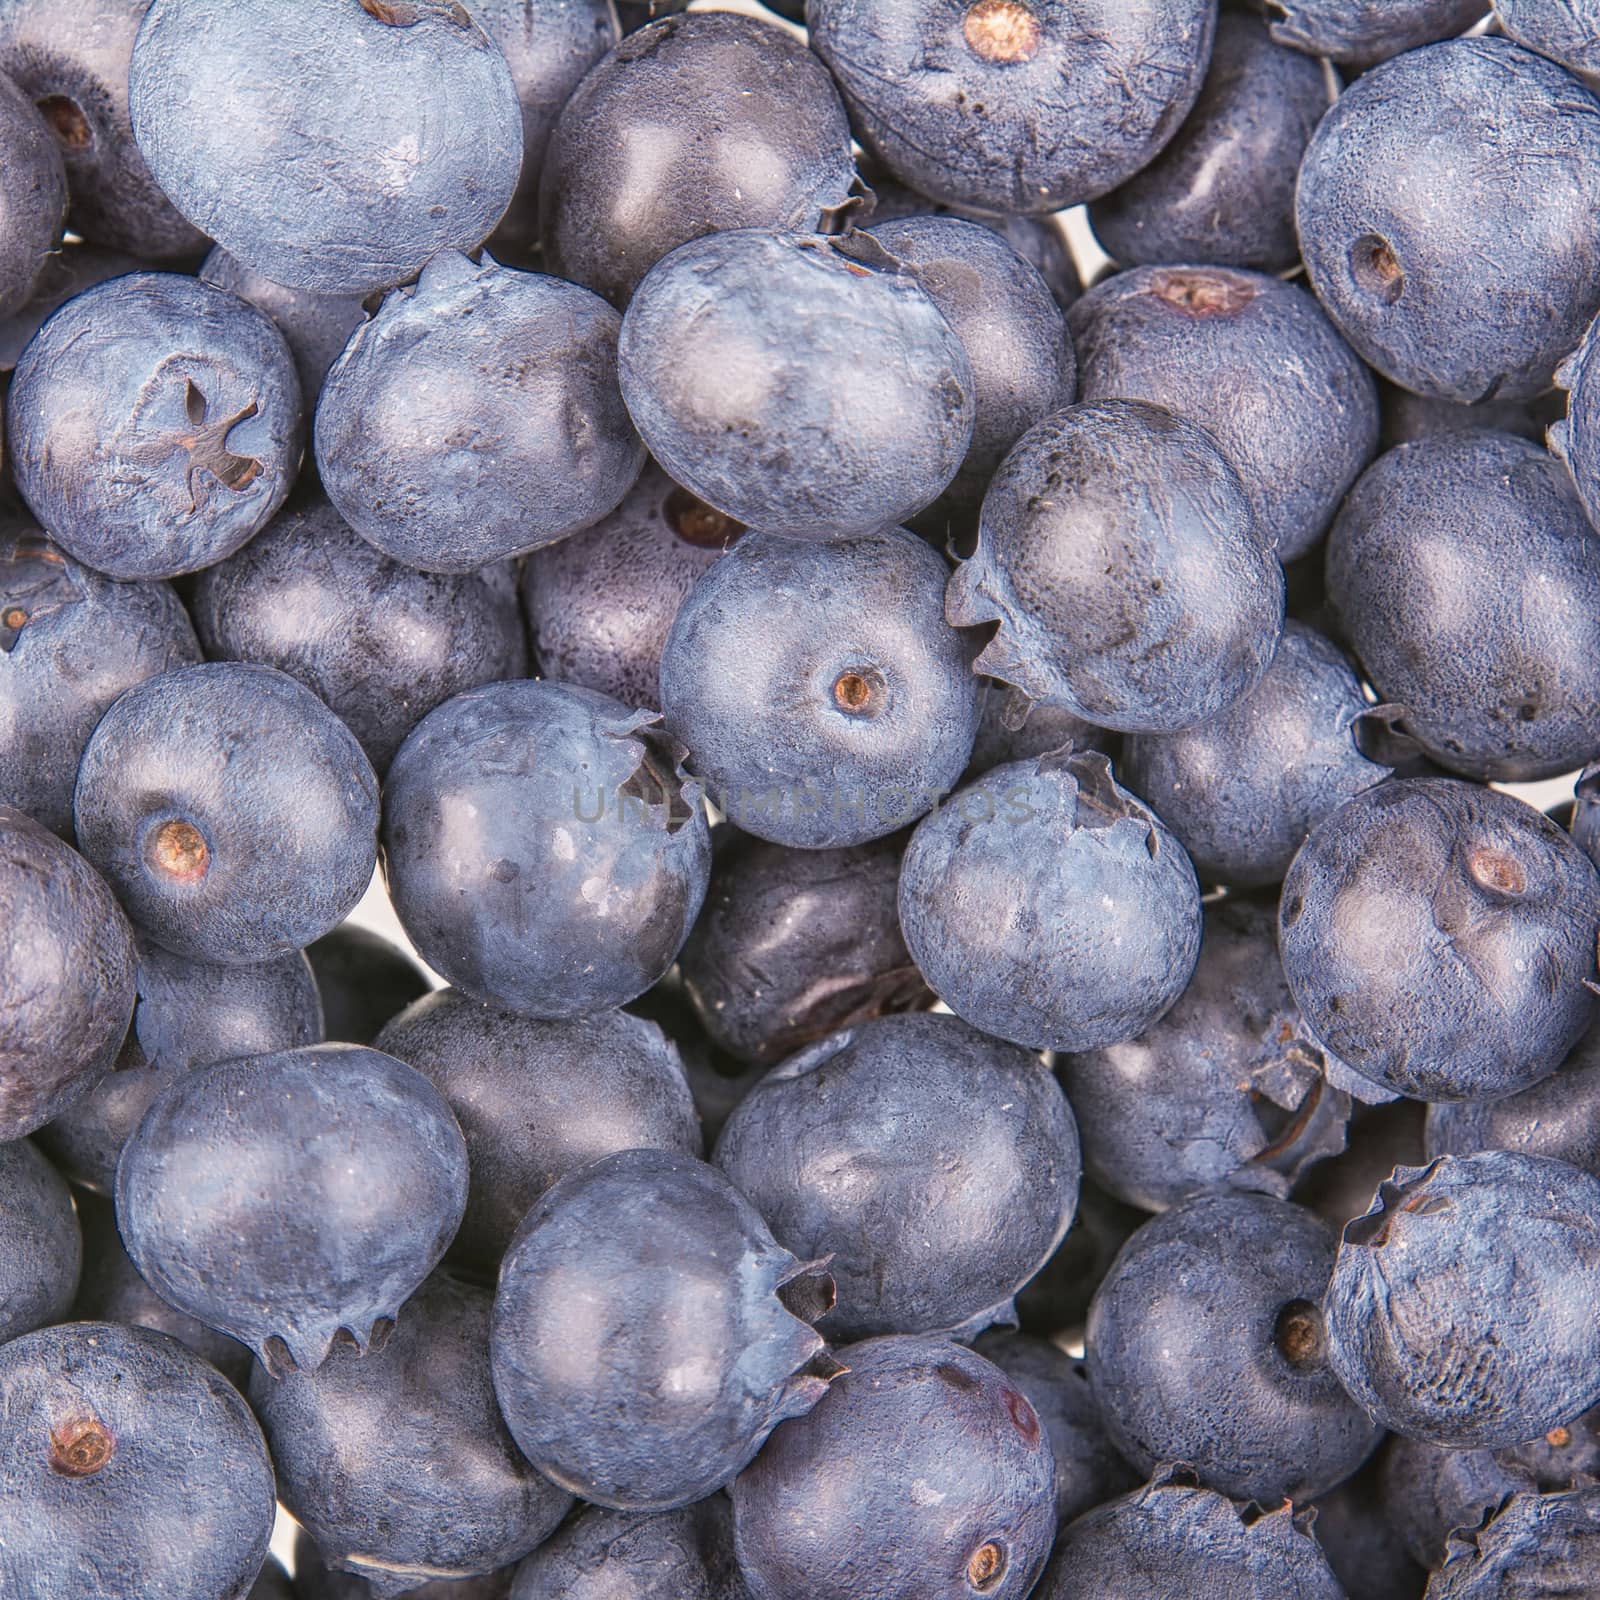 Freshly picked group of blueberries as creative background